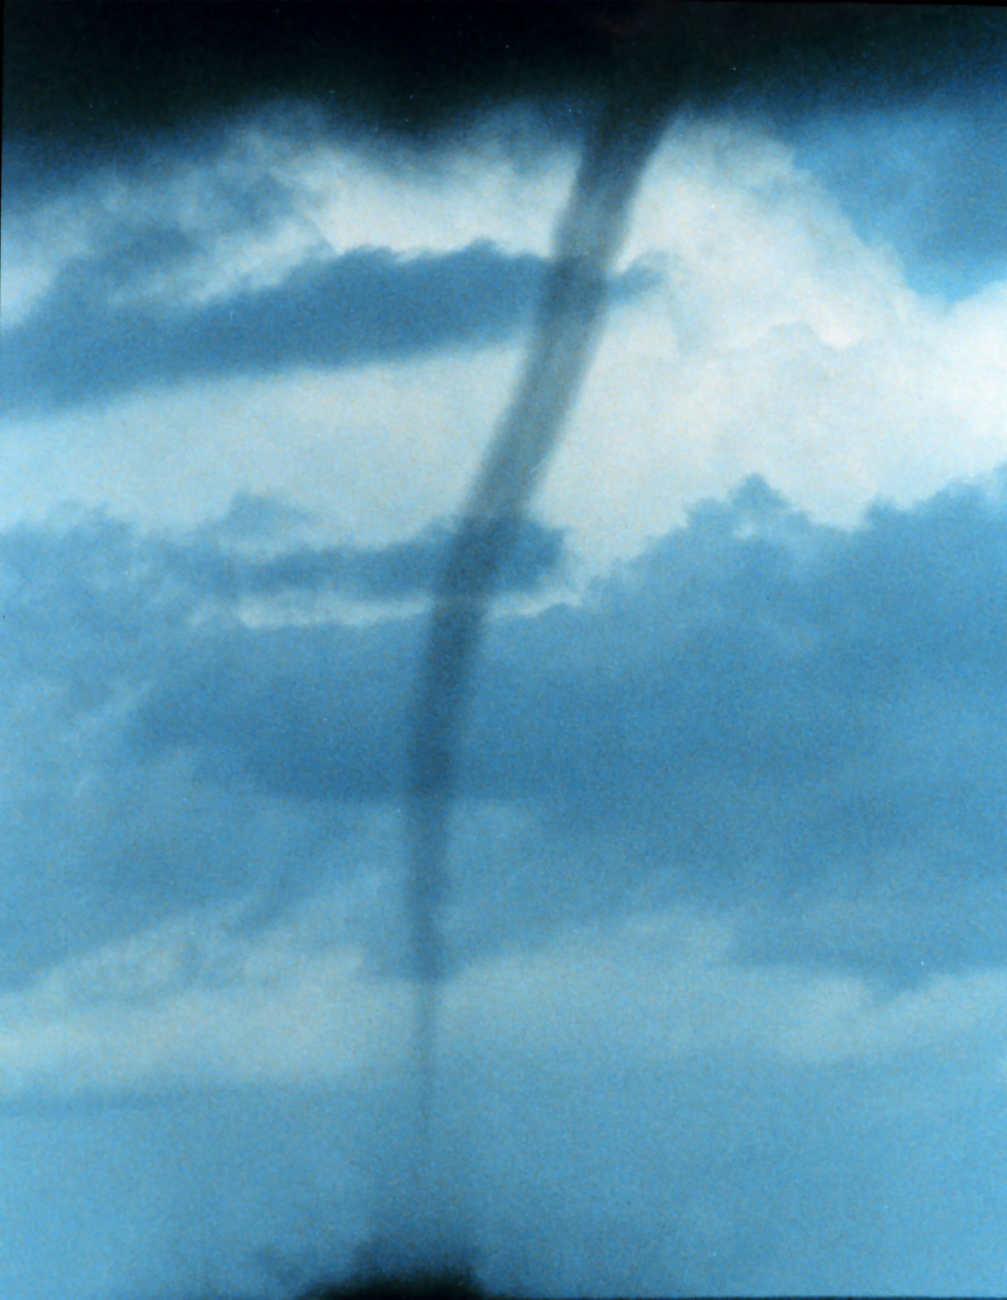 A waterspout in the Gulf of Mexico photographed from the NOAA Ship RUDE